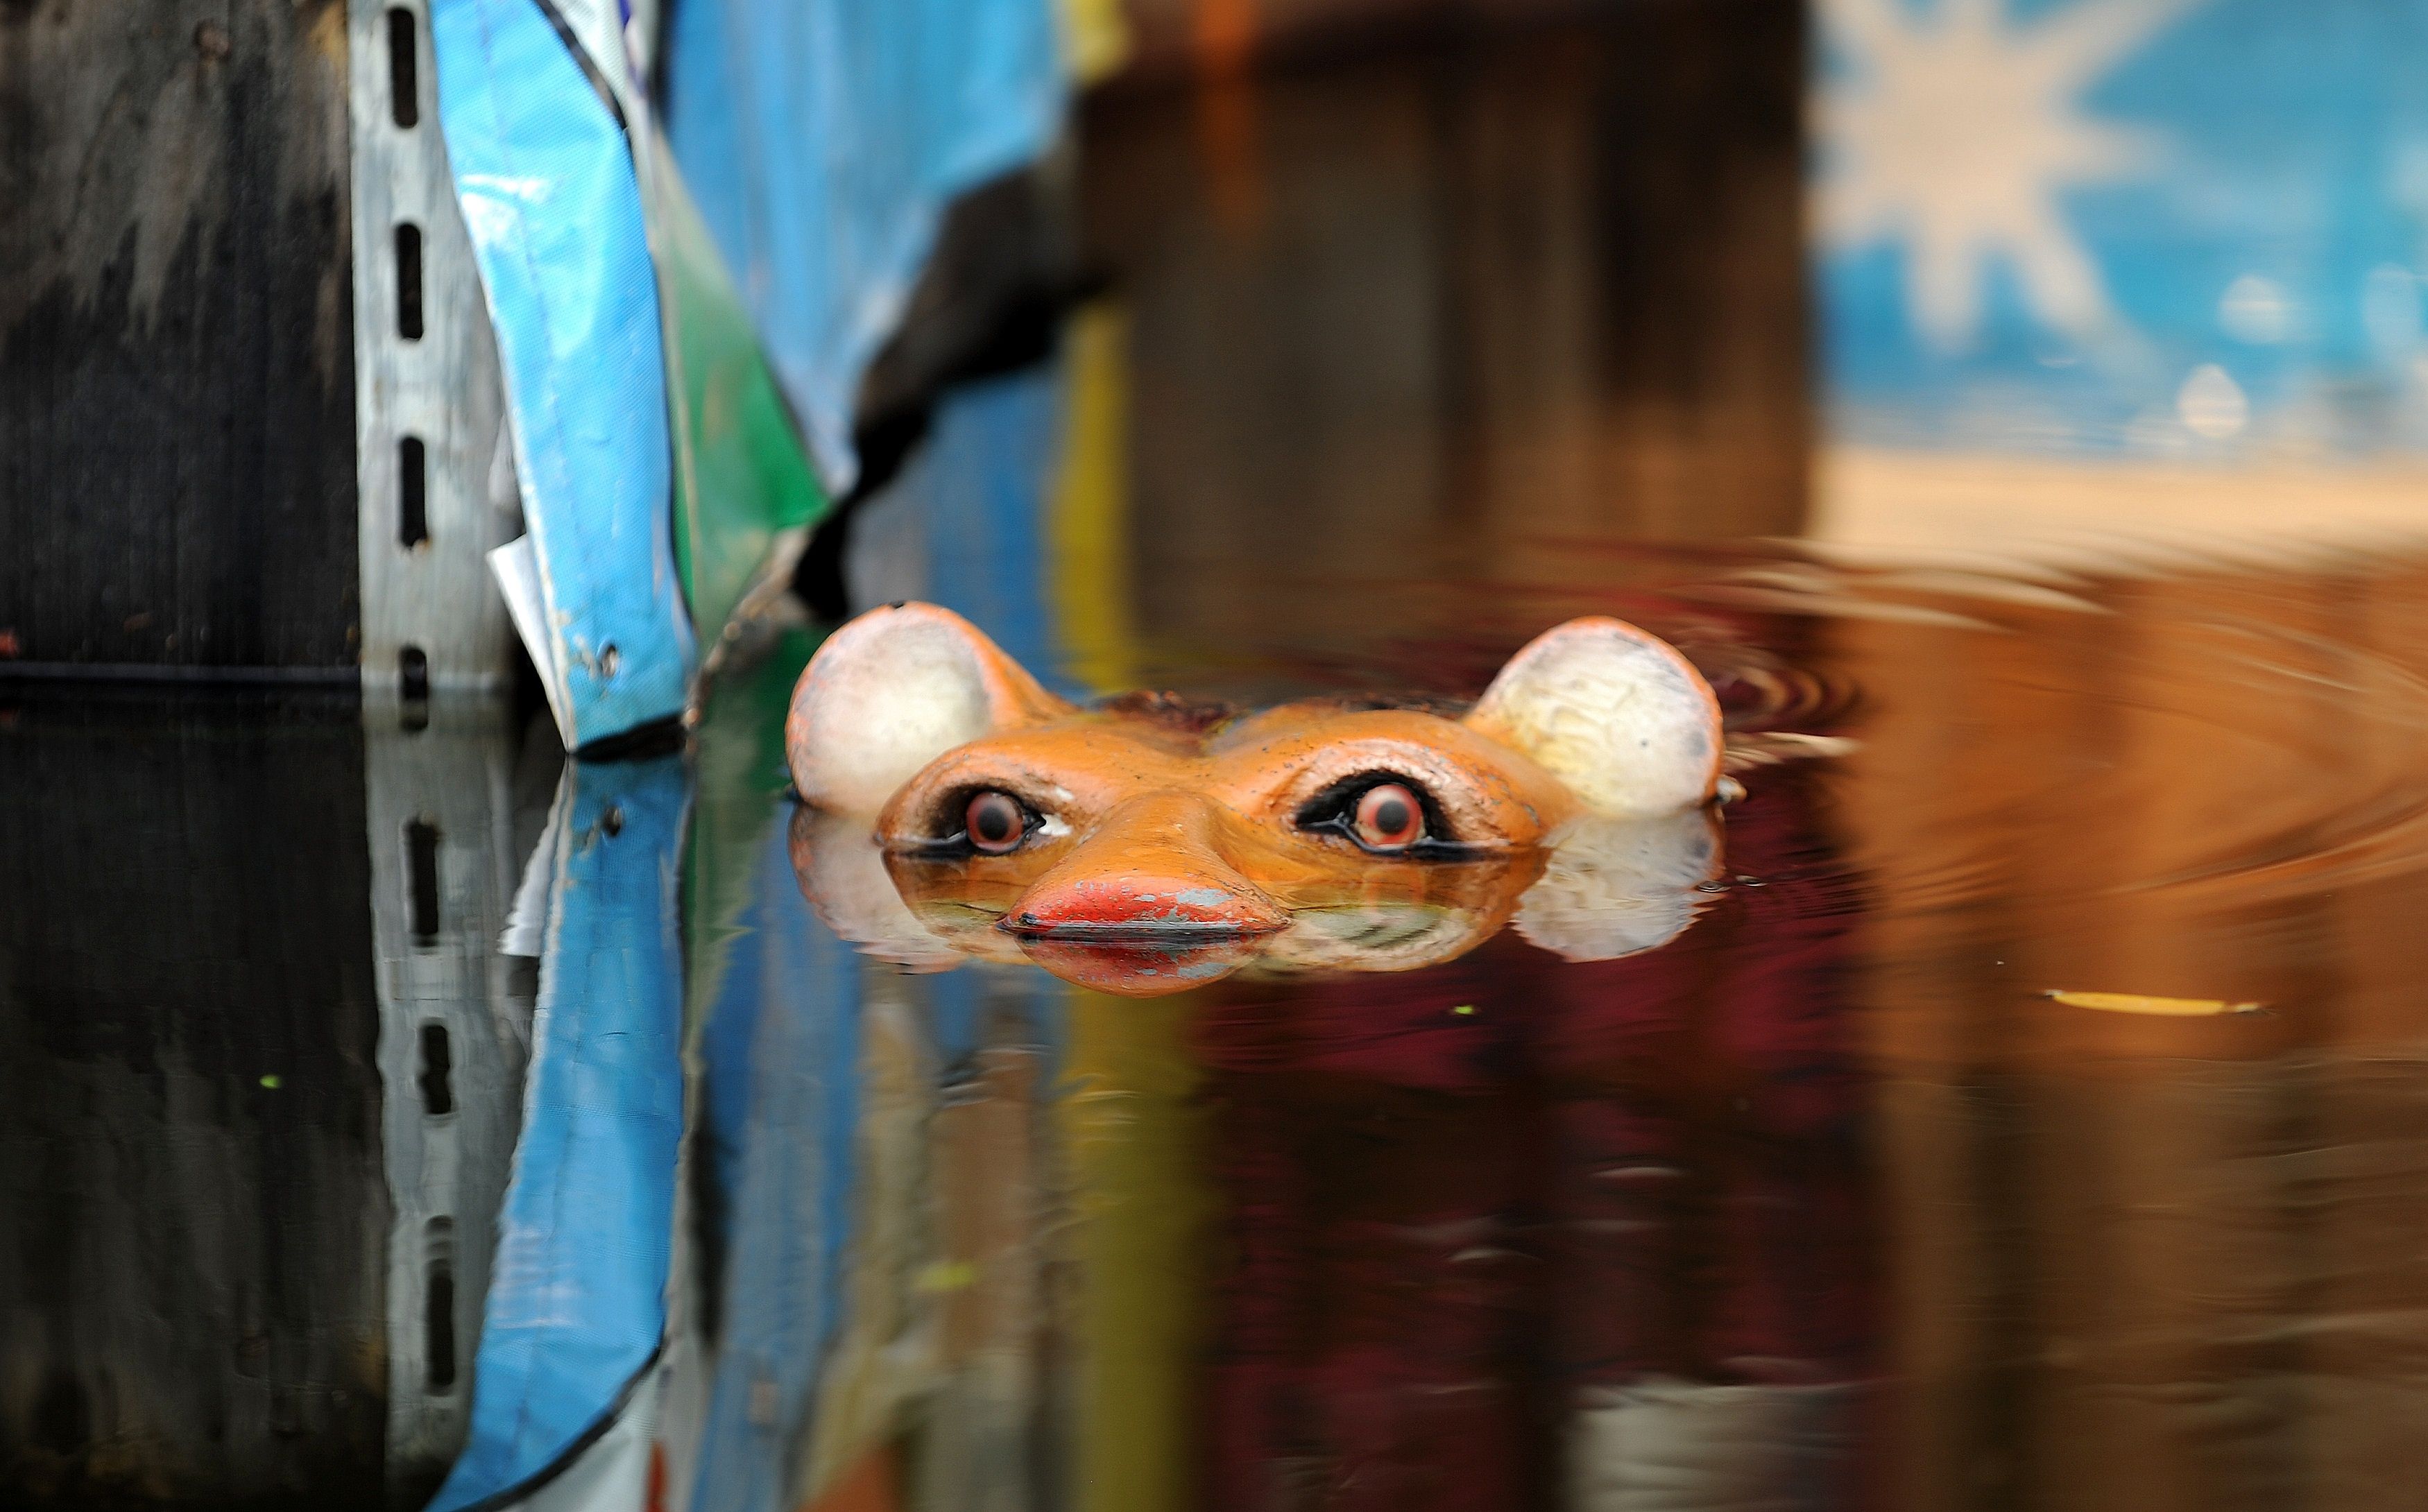 The eyes and nose of a tiger sculpture are seen in the flood waters in Bangkok on November 7, 2011. According to experts Thai capital, built on swampland, is slowly sinking and the floods currently besieging Bangkok could be merely a foretaste of a grim future as climate change makes its impact felt. AFP PHOTO/ SAEED KHAN